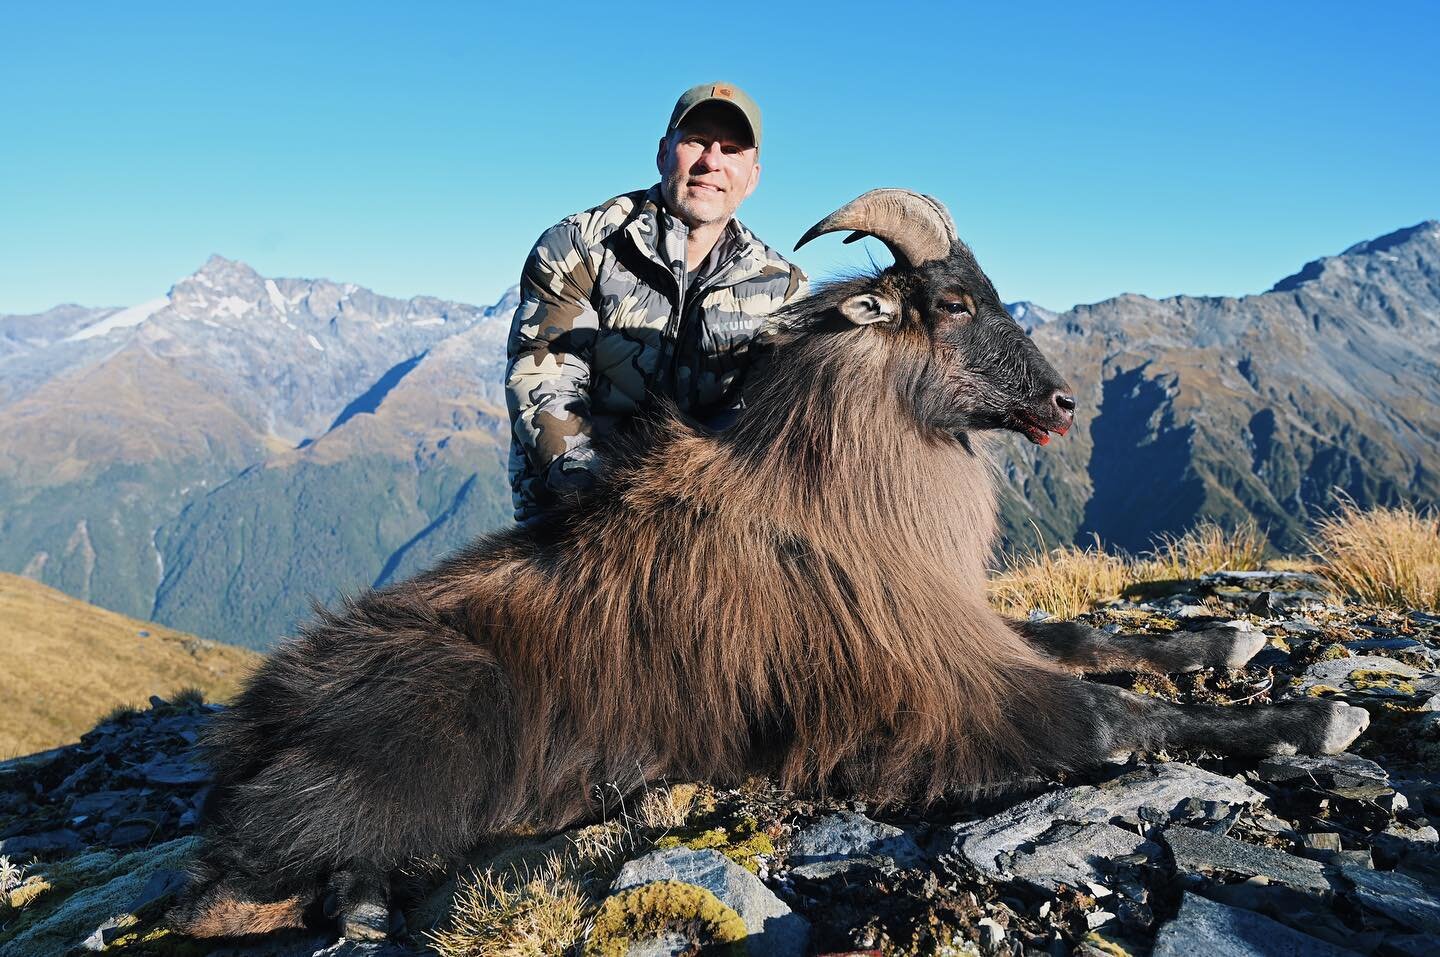 Kings of our New Zealand mountains!!! If you want to hunt these stunning animals get in touch. 

#exclusiveadventurenz #newzealand #newzealandhunting #mountainhunting #tahr #bulltahr #travelhunting #kuiu #kuiunation #whatgetsyououtdoors